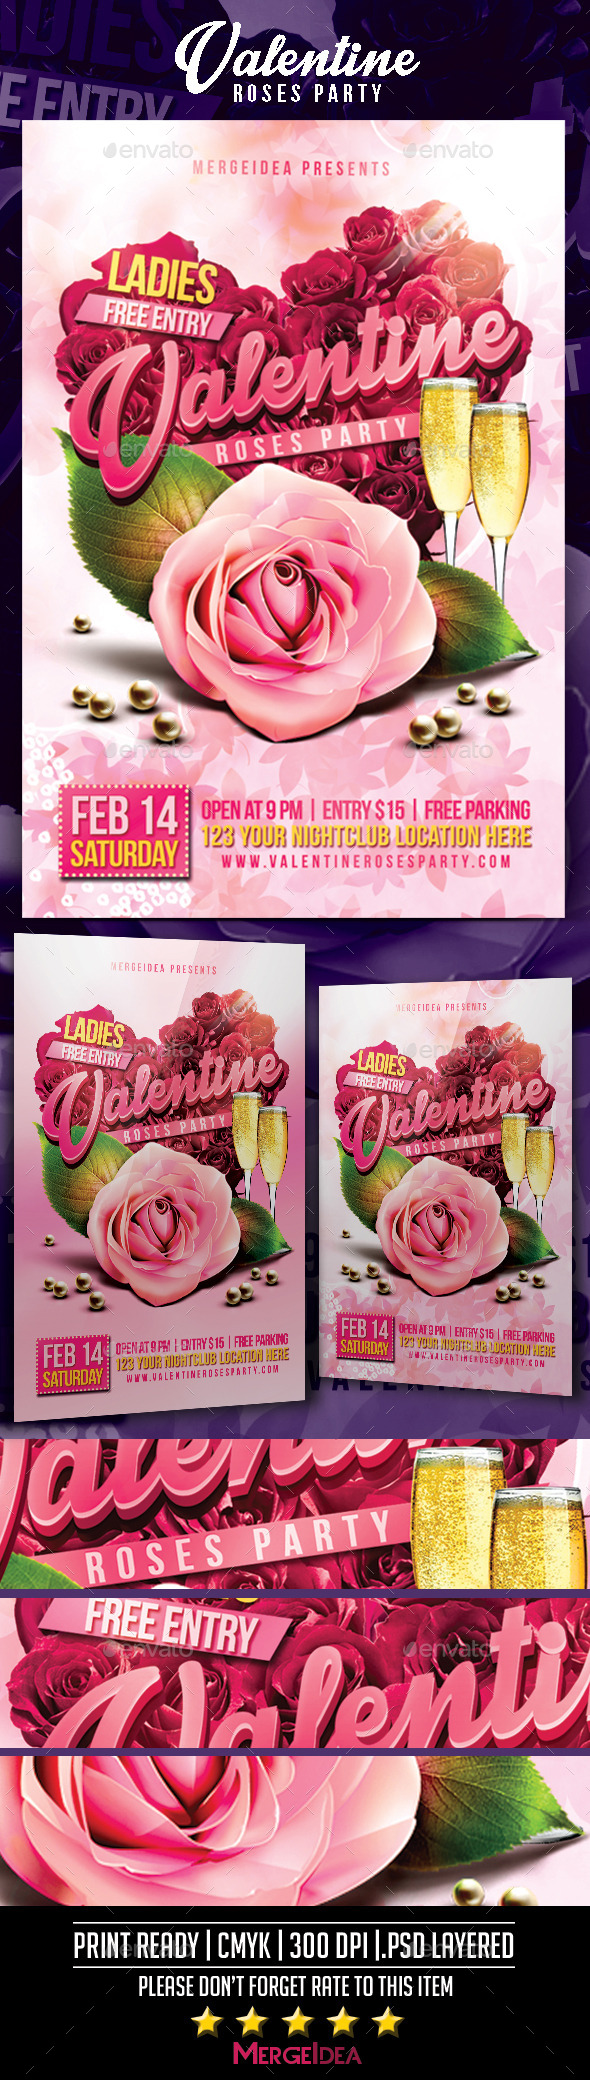 Valentine Roses Party Flyer